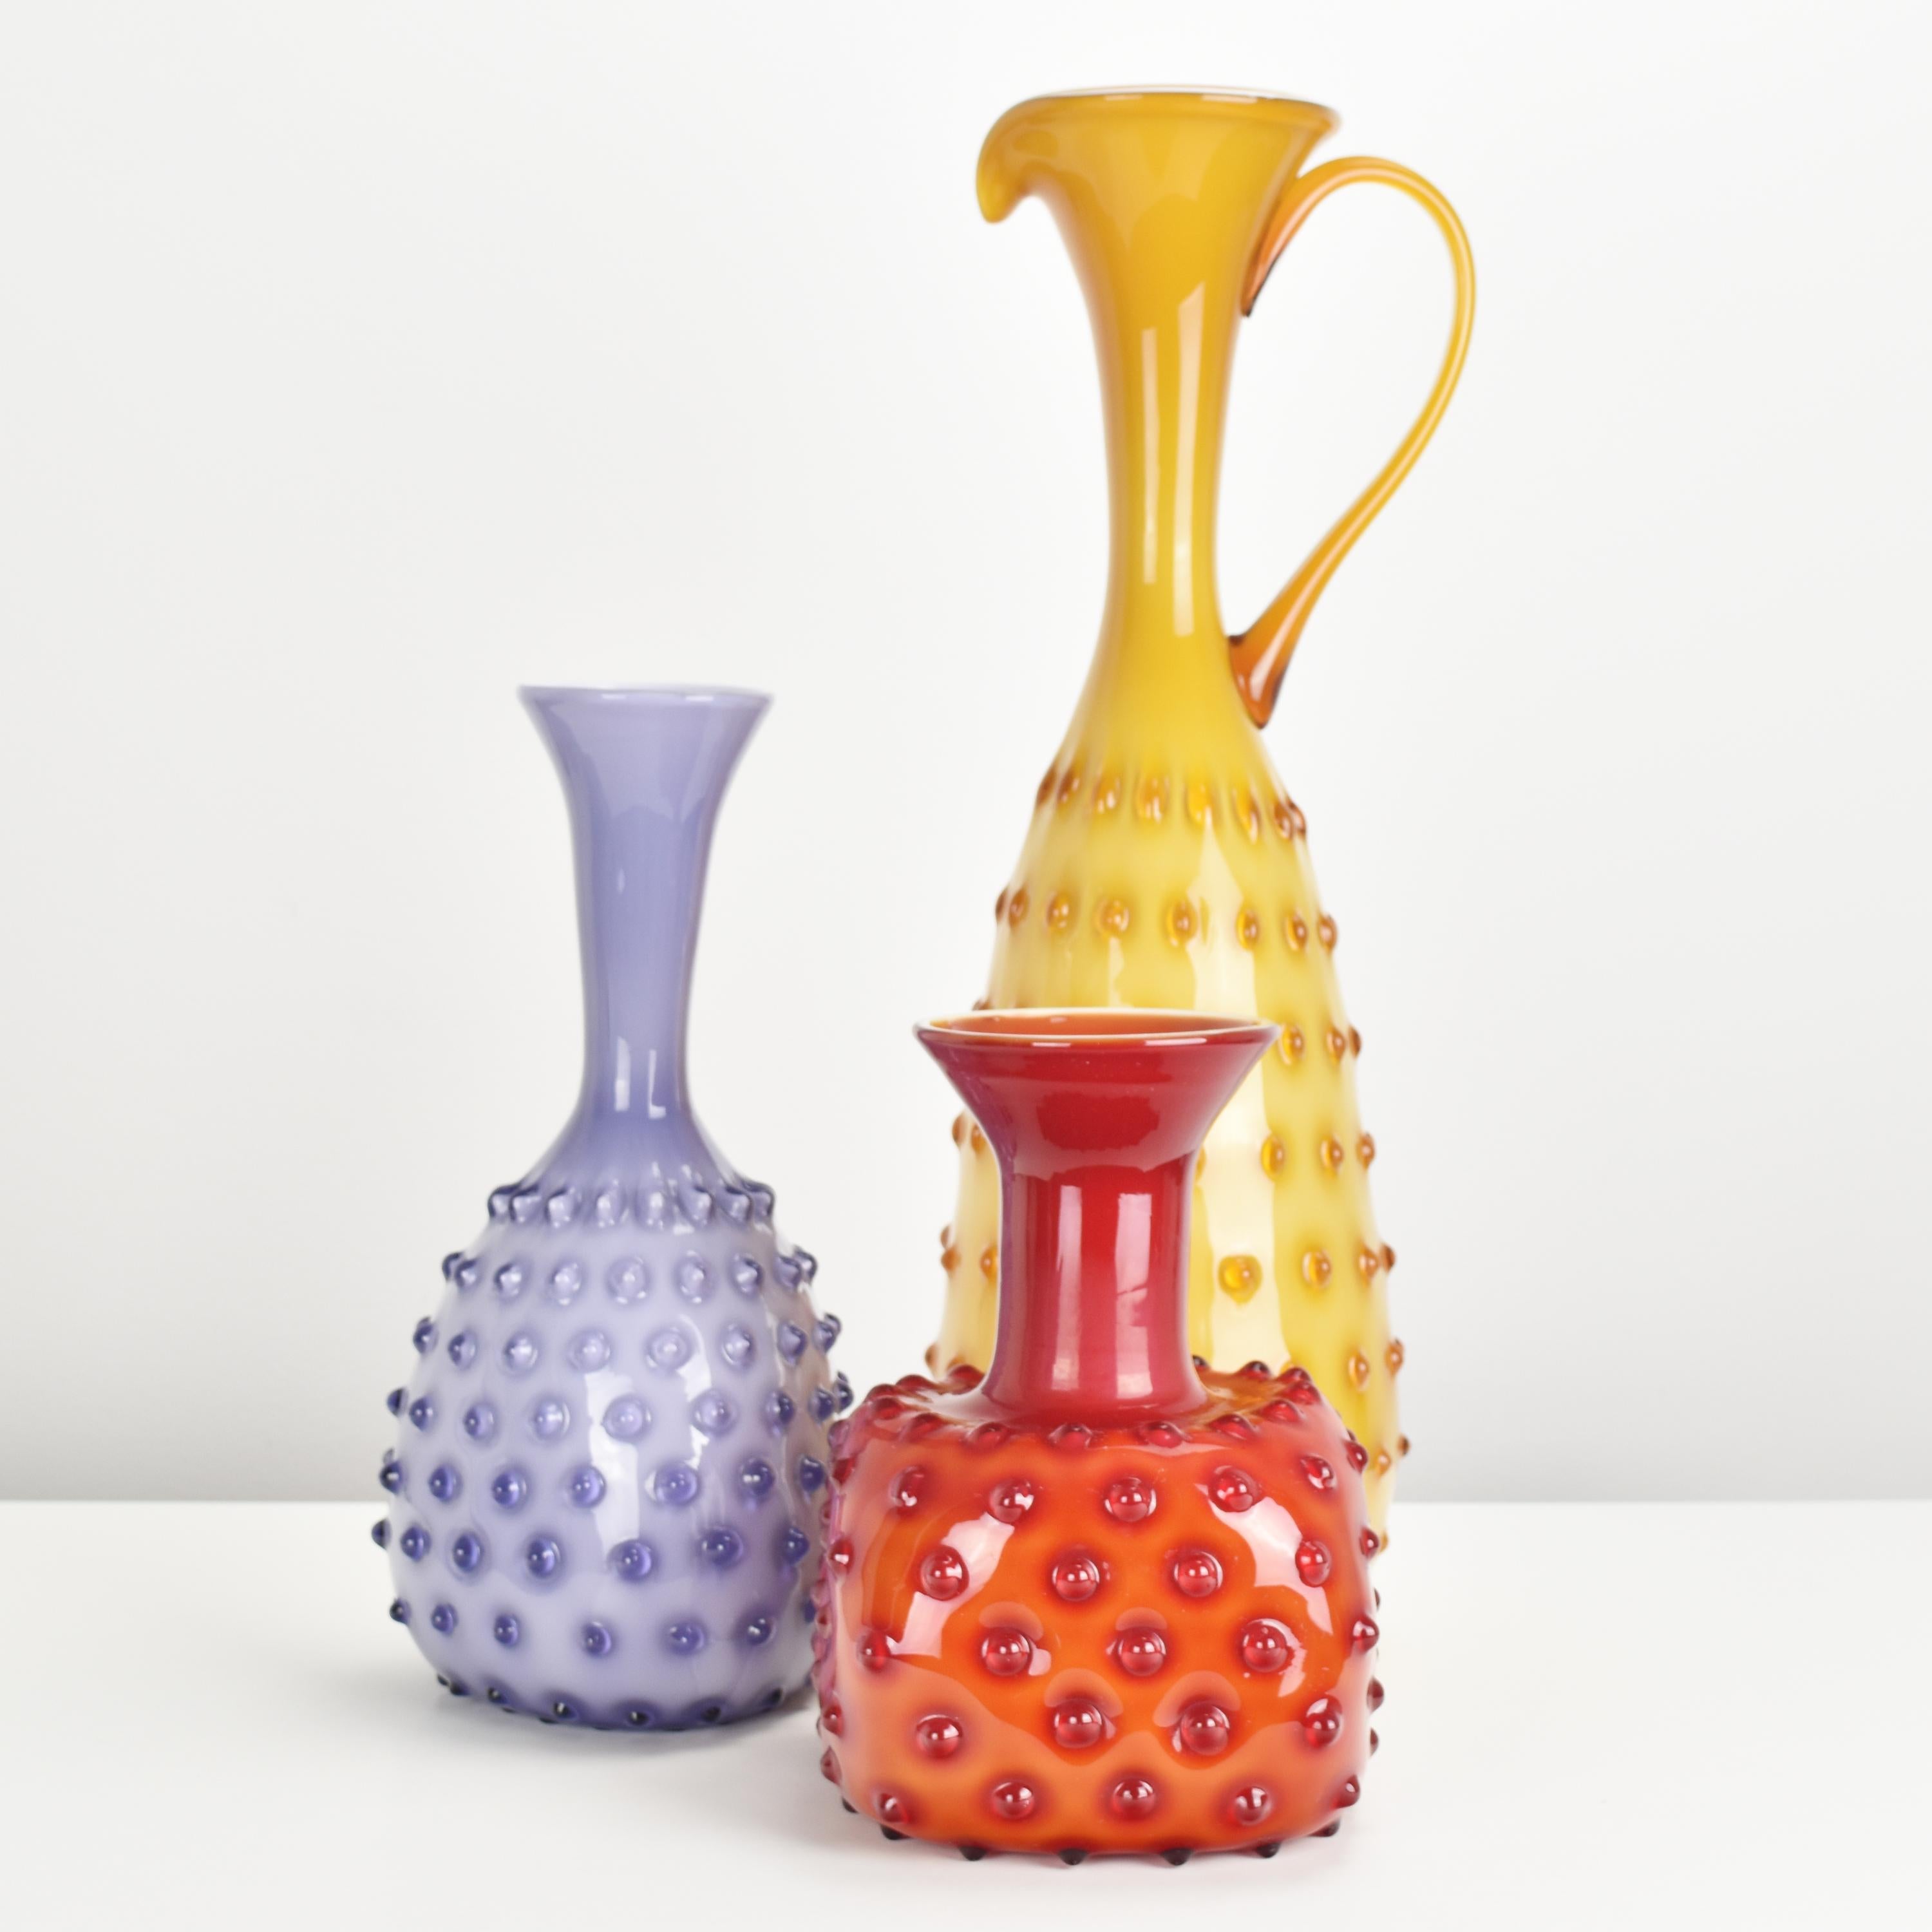 The set of three different Empoli vases with a hobnail pattern showcases the charm and craftsmanship of mid-century Italian glassmaking. Empoli is a region in Tuscany, Italy, renowned for its long tradition of producing high-quality glassware.

Each